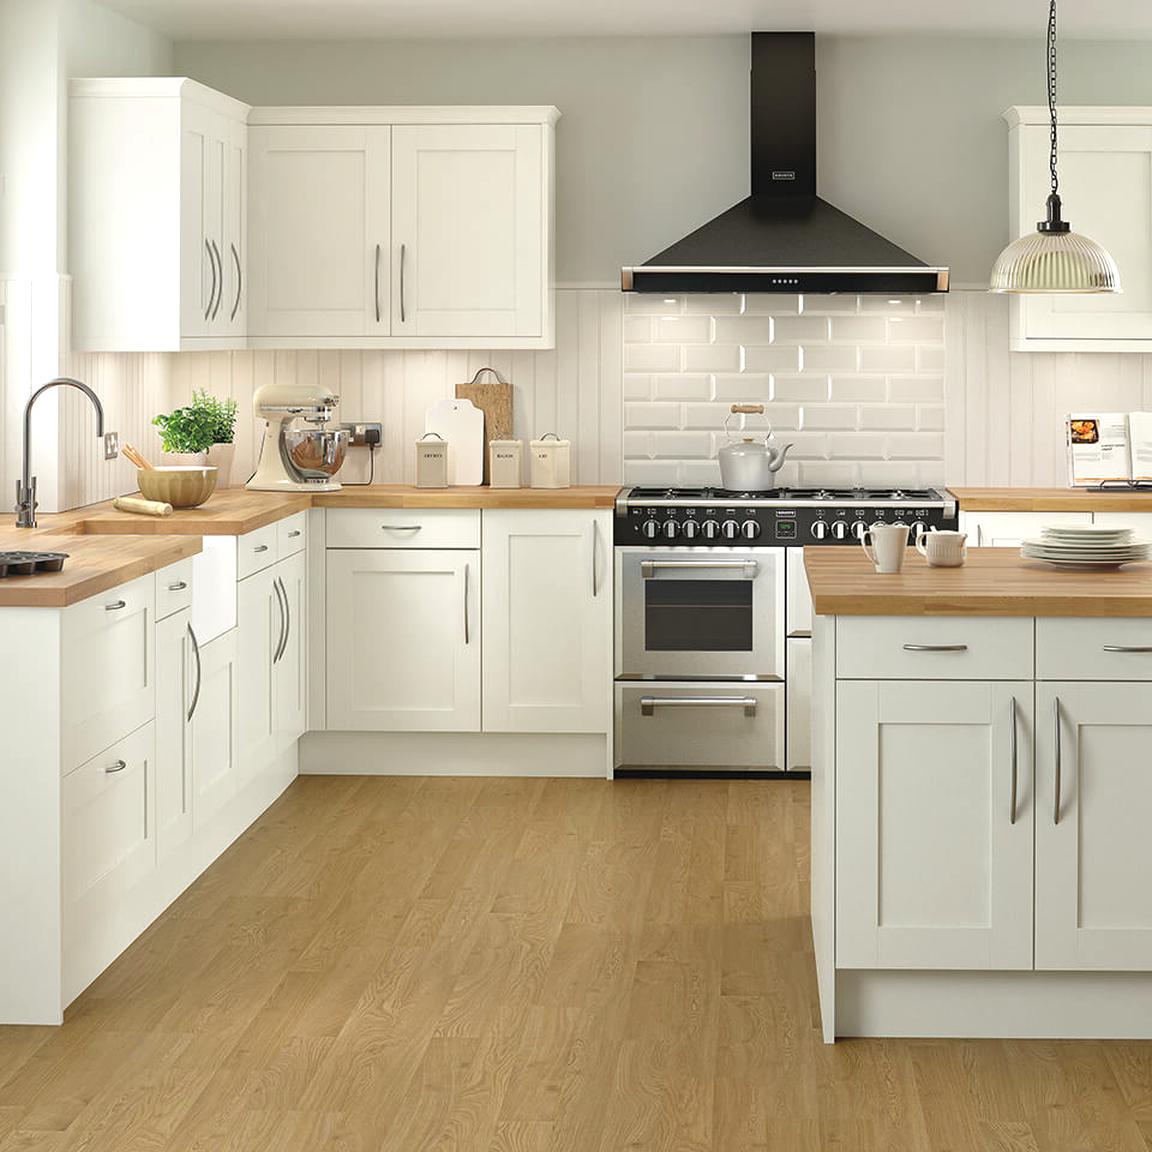  Homebase  Kitchen  for sale in UK  View 43 bargains